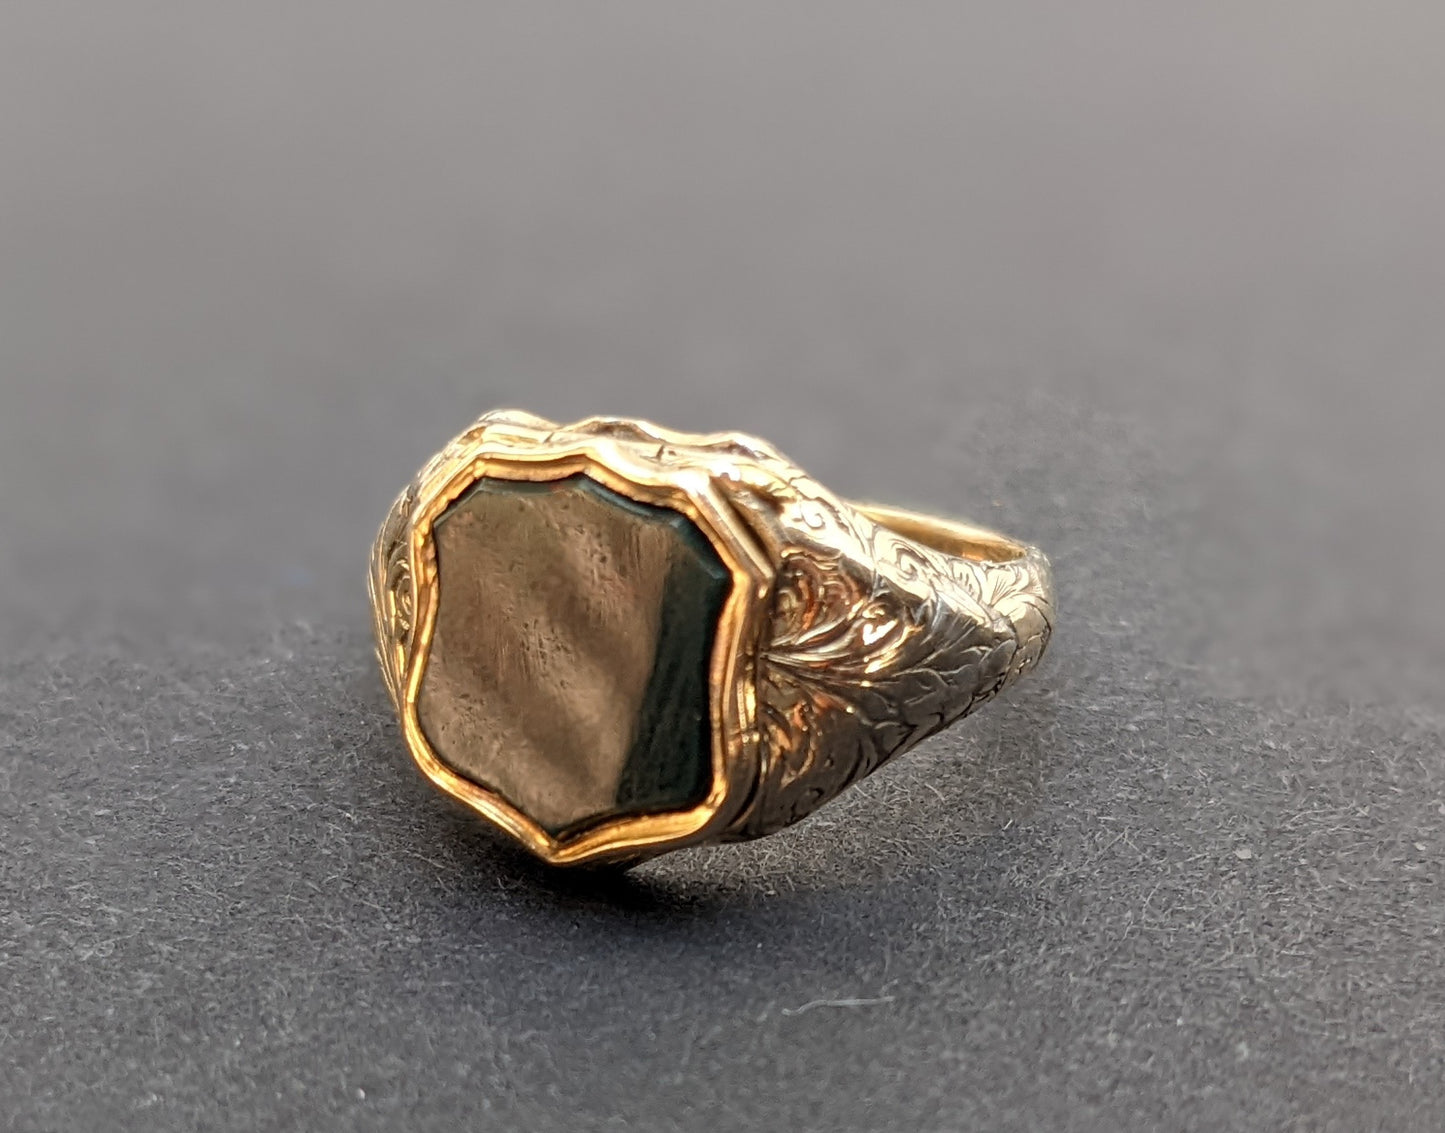 Bloodstone signet ring with hidden compartment